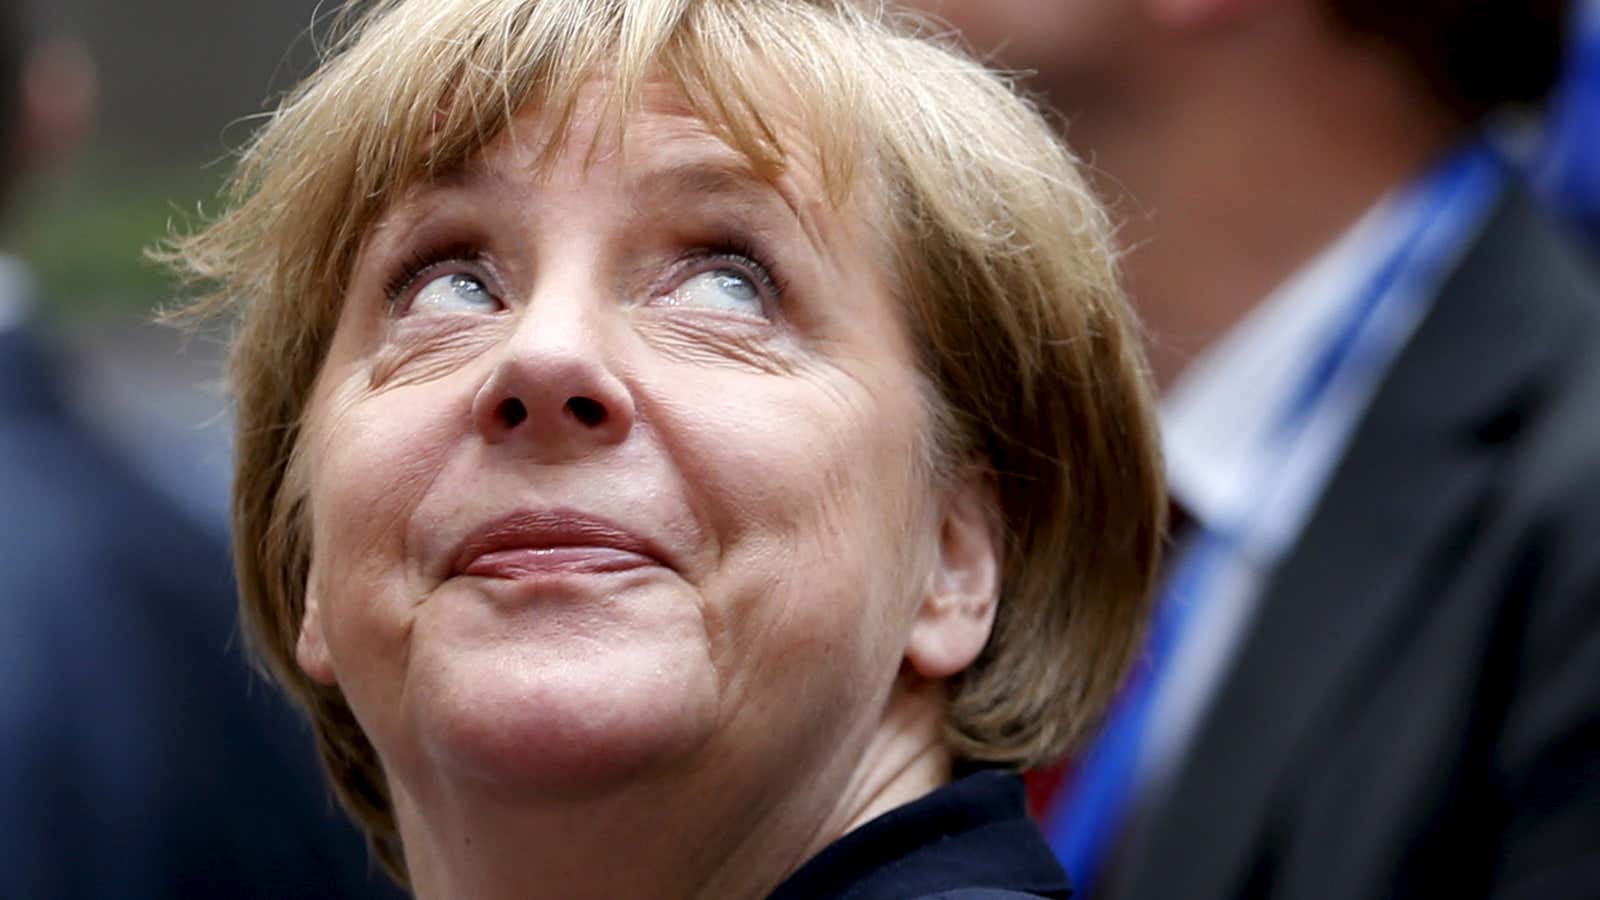 Germany’s Chancellor Angela Merkel looks up as she arrives at an emergency euro zone summit in Brussels, Belgium.